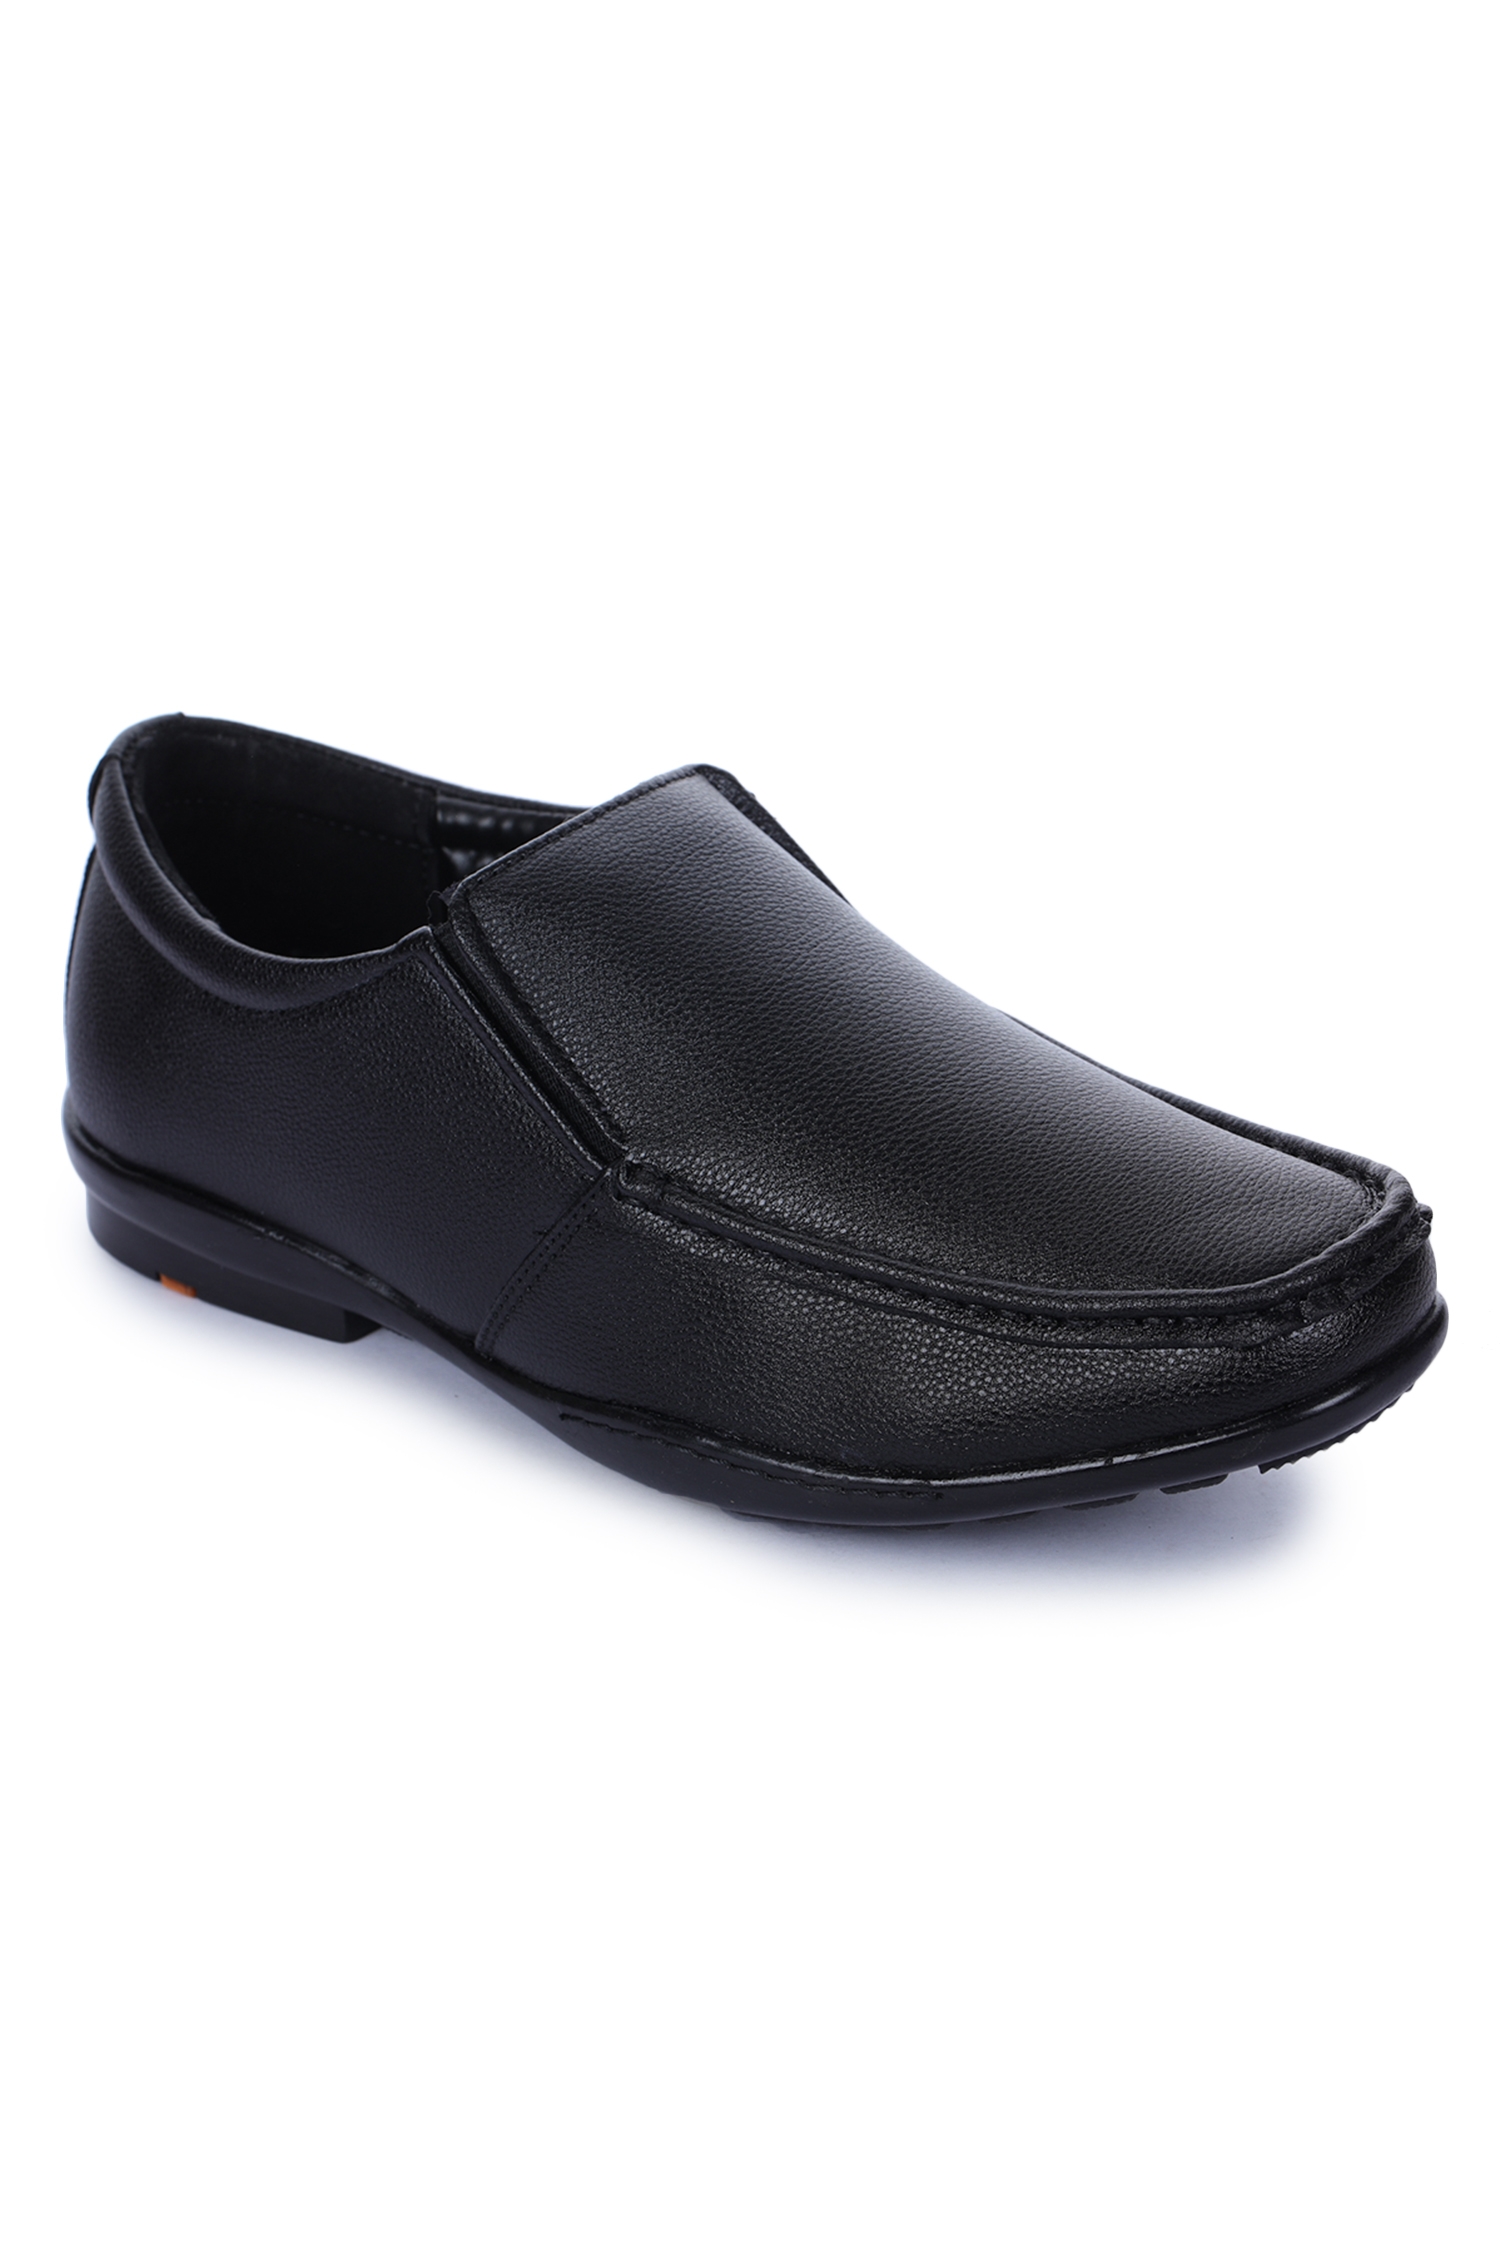 Liberty | Liberty Fortune Black Formal Oxfords Shoes A8-02_Black For - Men